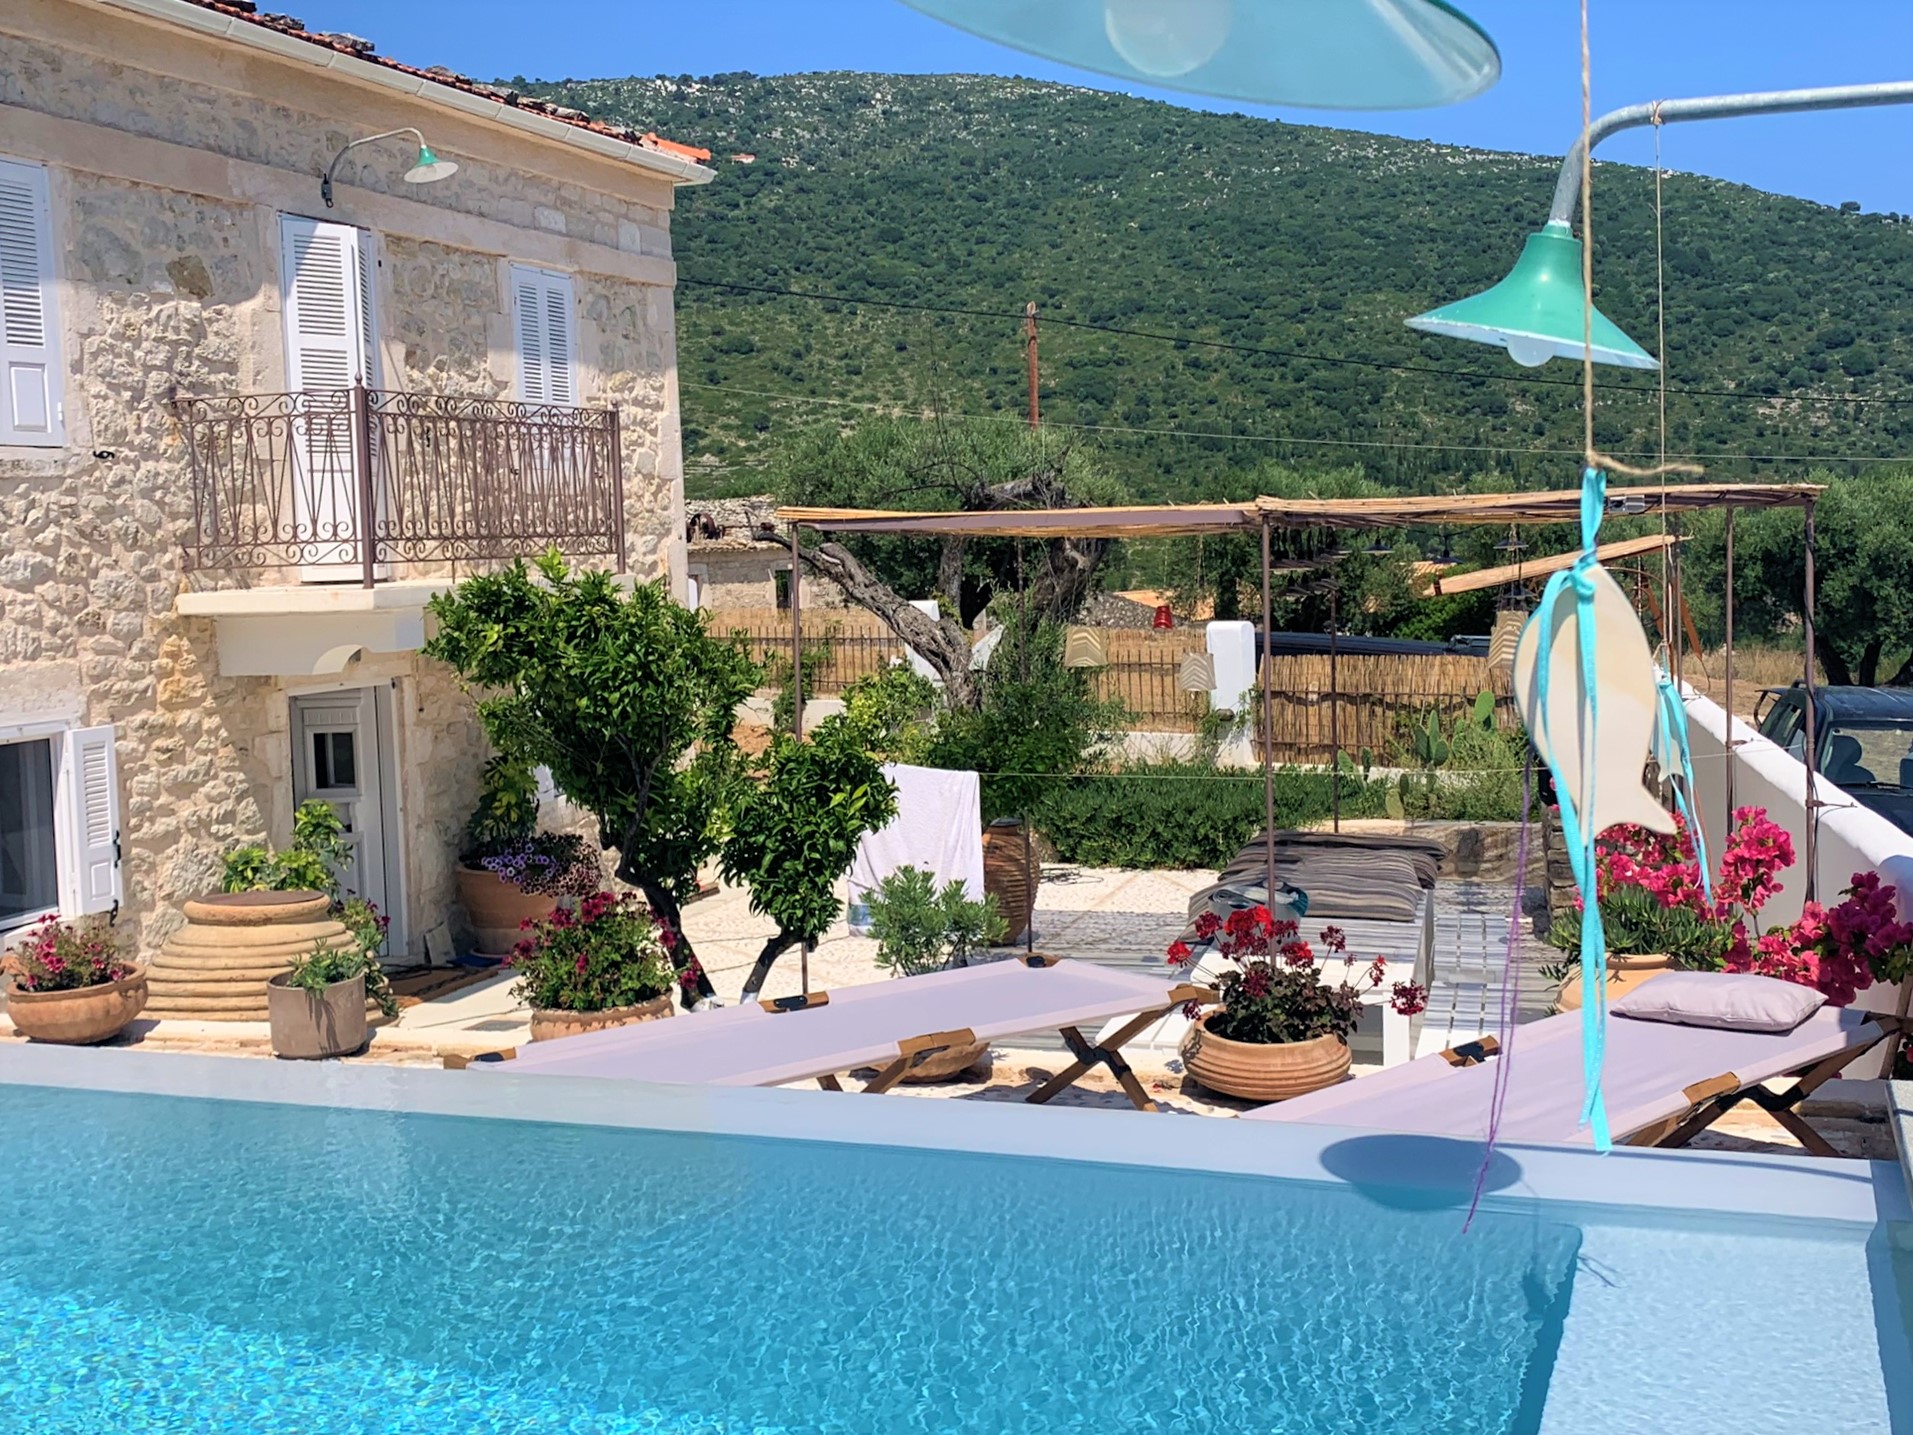 Swimming pool of villa for rent on Ithaca Greece, Lahos